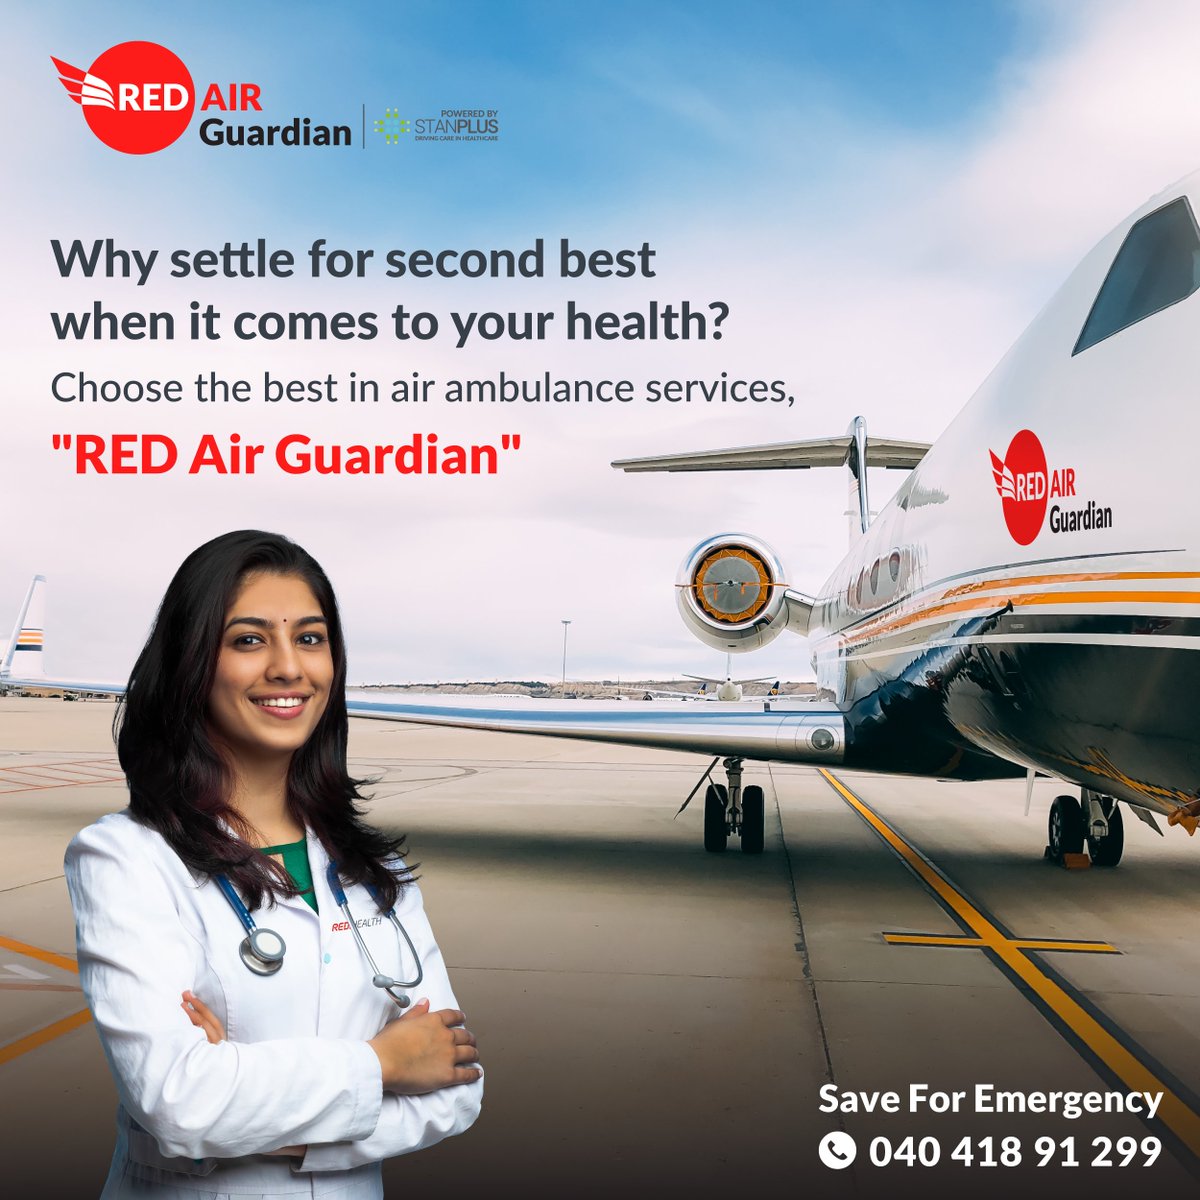 RED Air Guardian offers the premier air ambulance services in need of medical transportation. Trust us to get you the care you need. 

#ambulance #healthcare #medicalresponse #fastestmedicalresponseteam #twitter #airambulance #EmergencyMedicalTransportation #REDAirGuardian